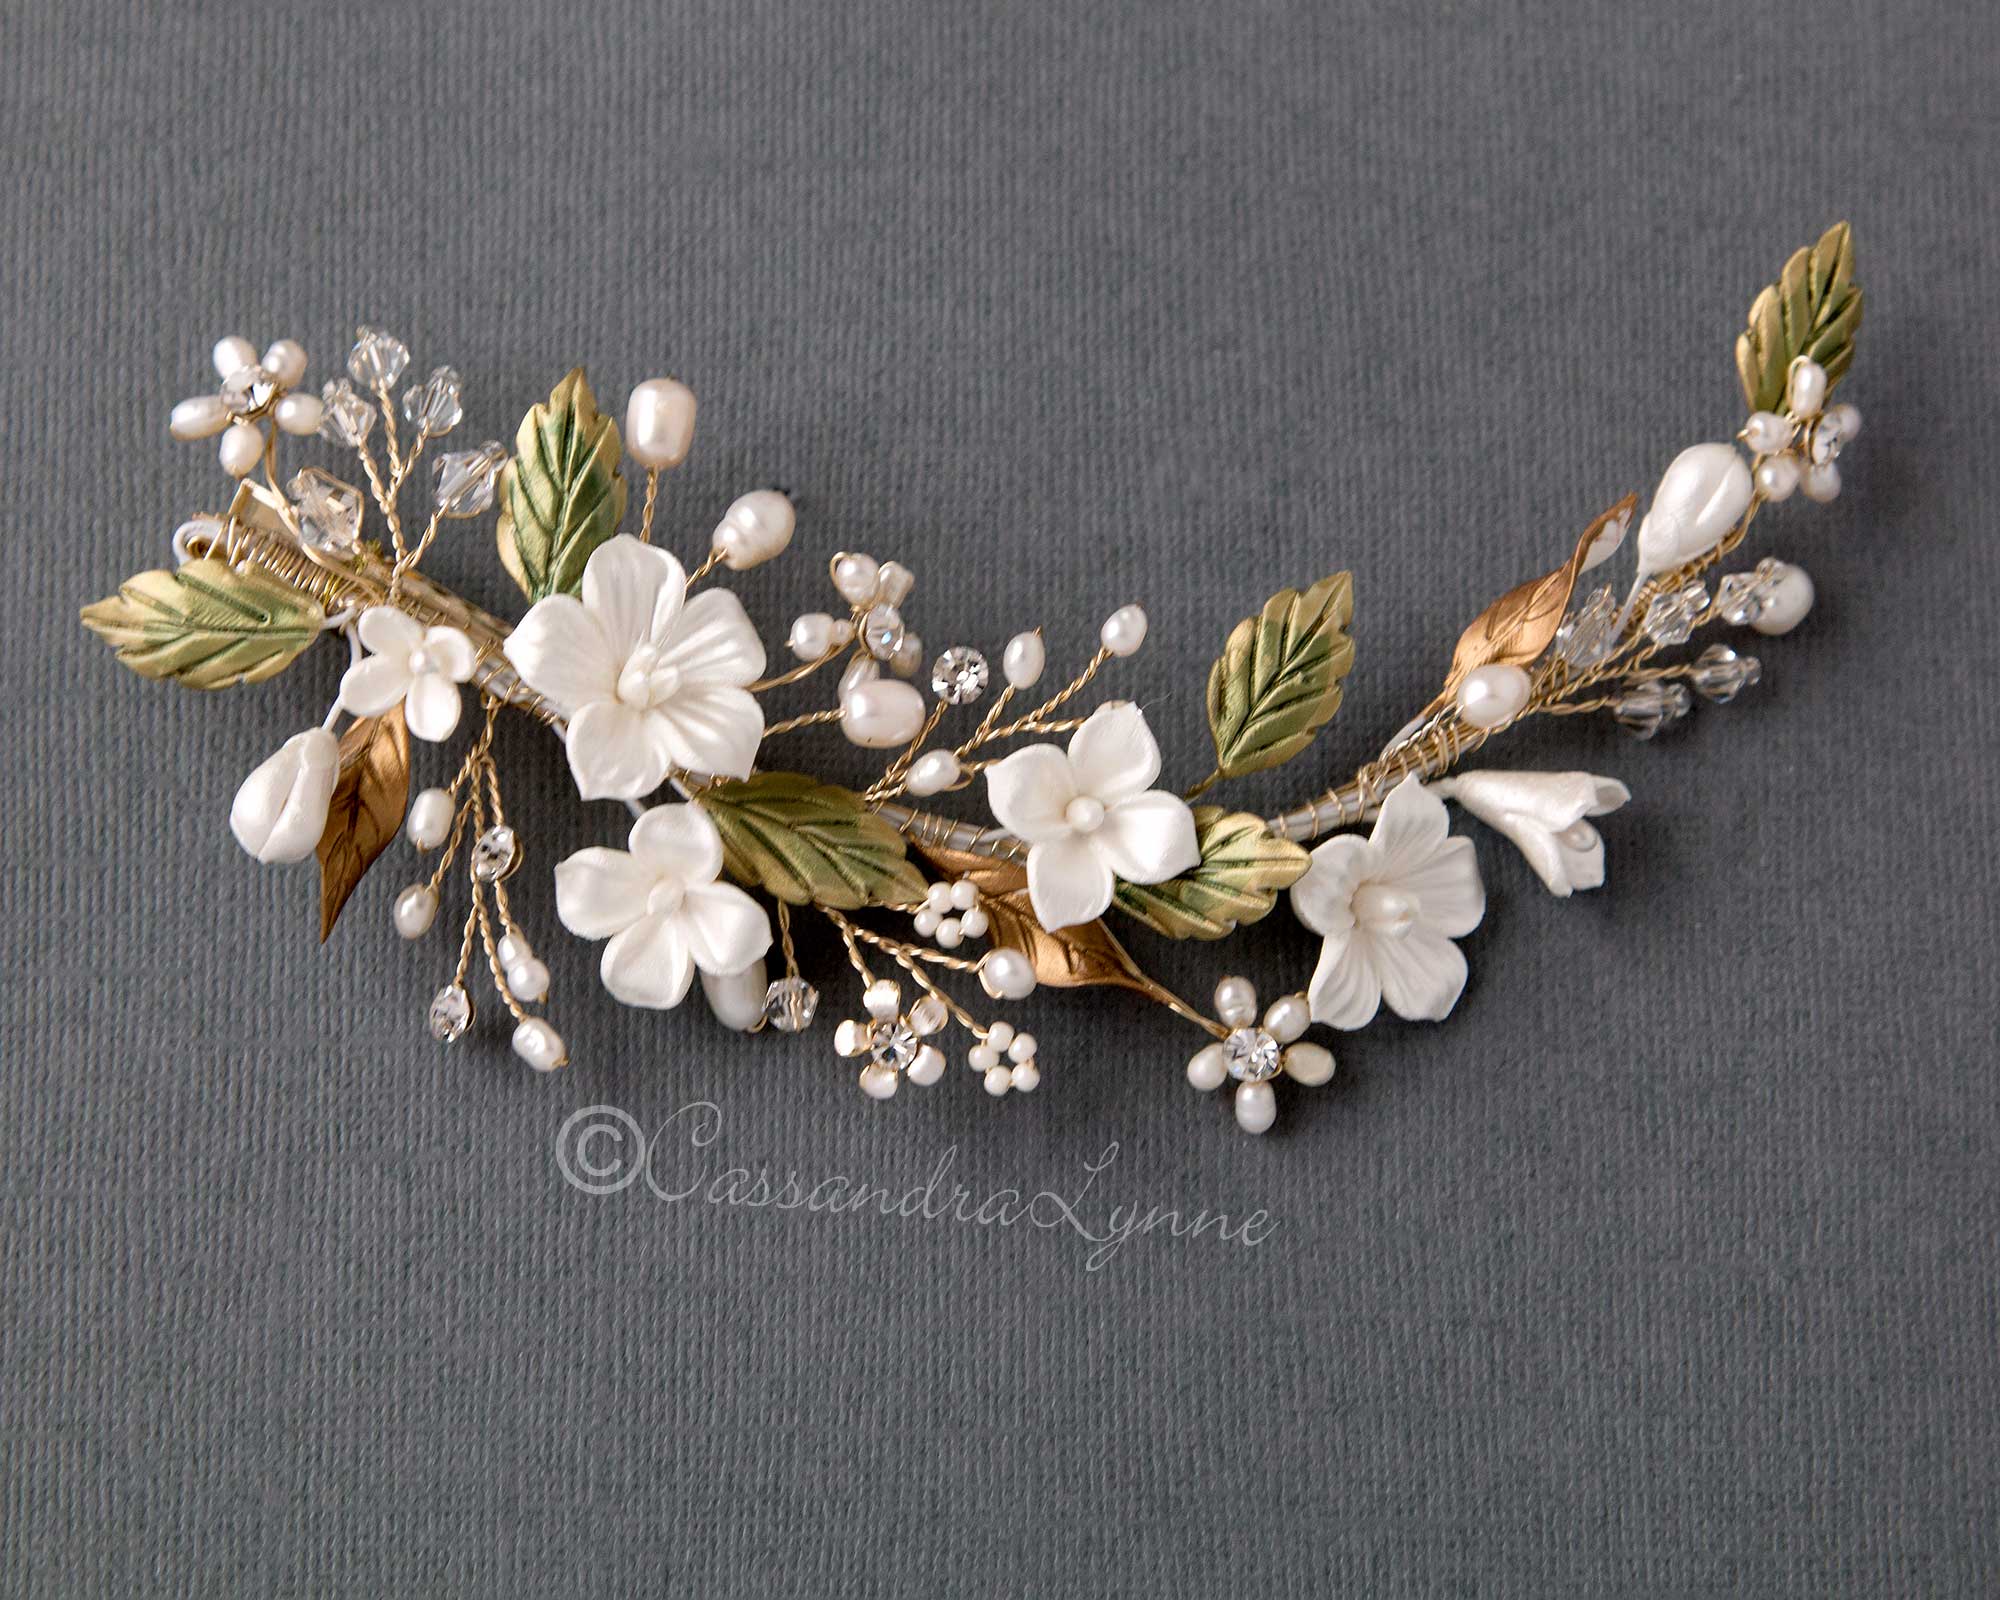 Bridal Clip with Green Leaves and Porcelain Flowers